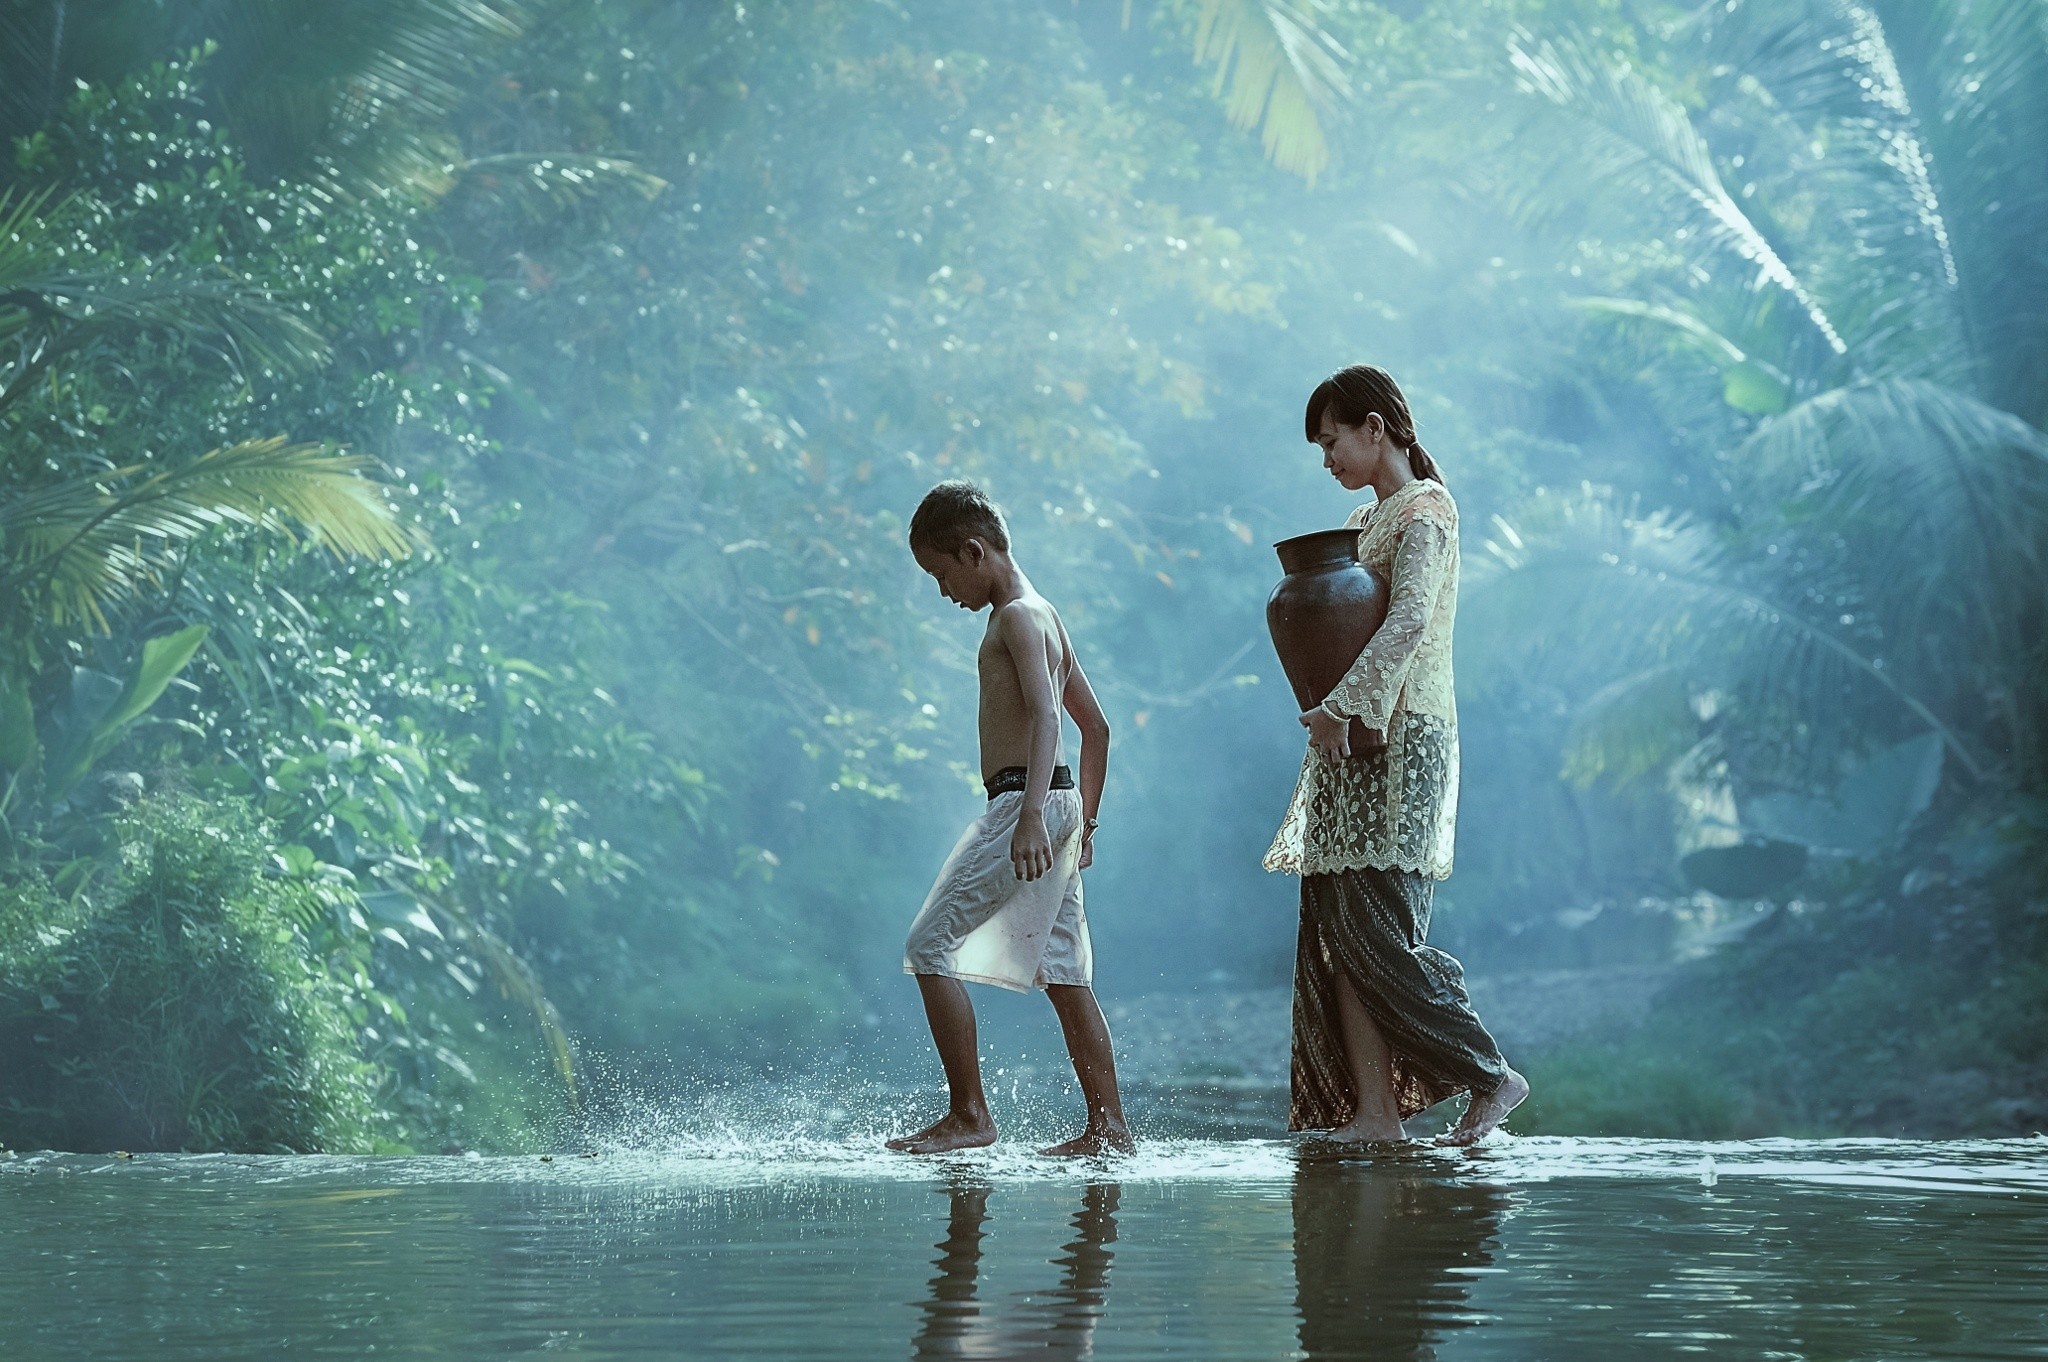 General 2048x1362 people Asian jungle pond peasants children outdoors